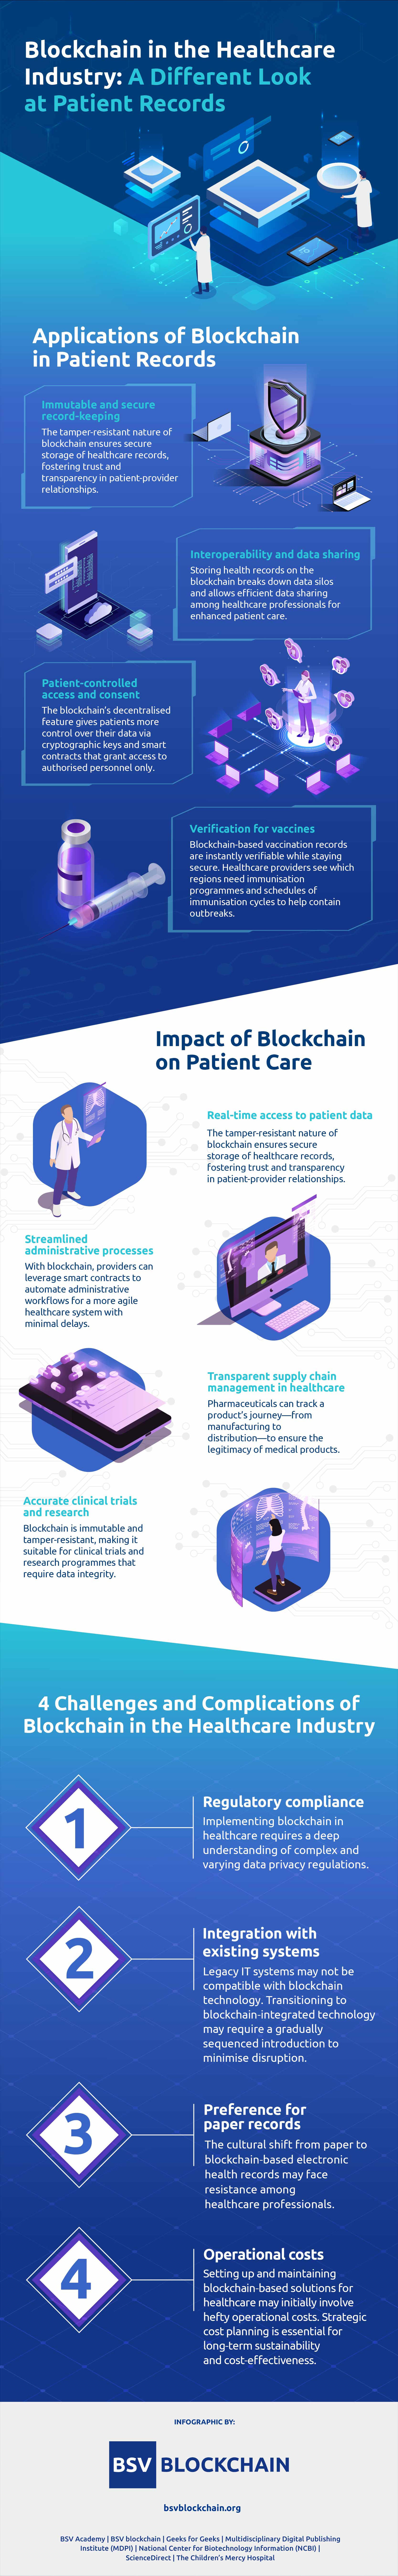 Blockchain in the Healthcare Industry